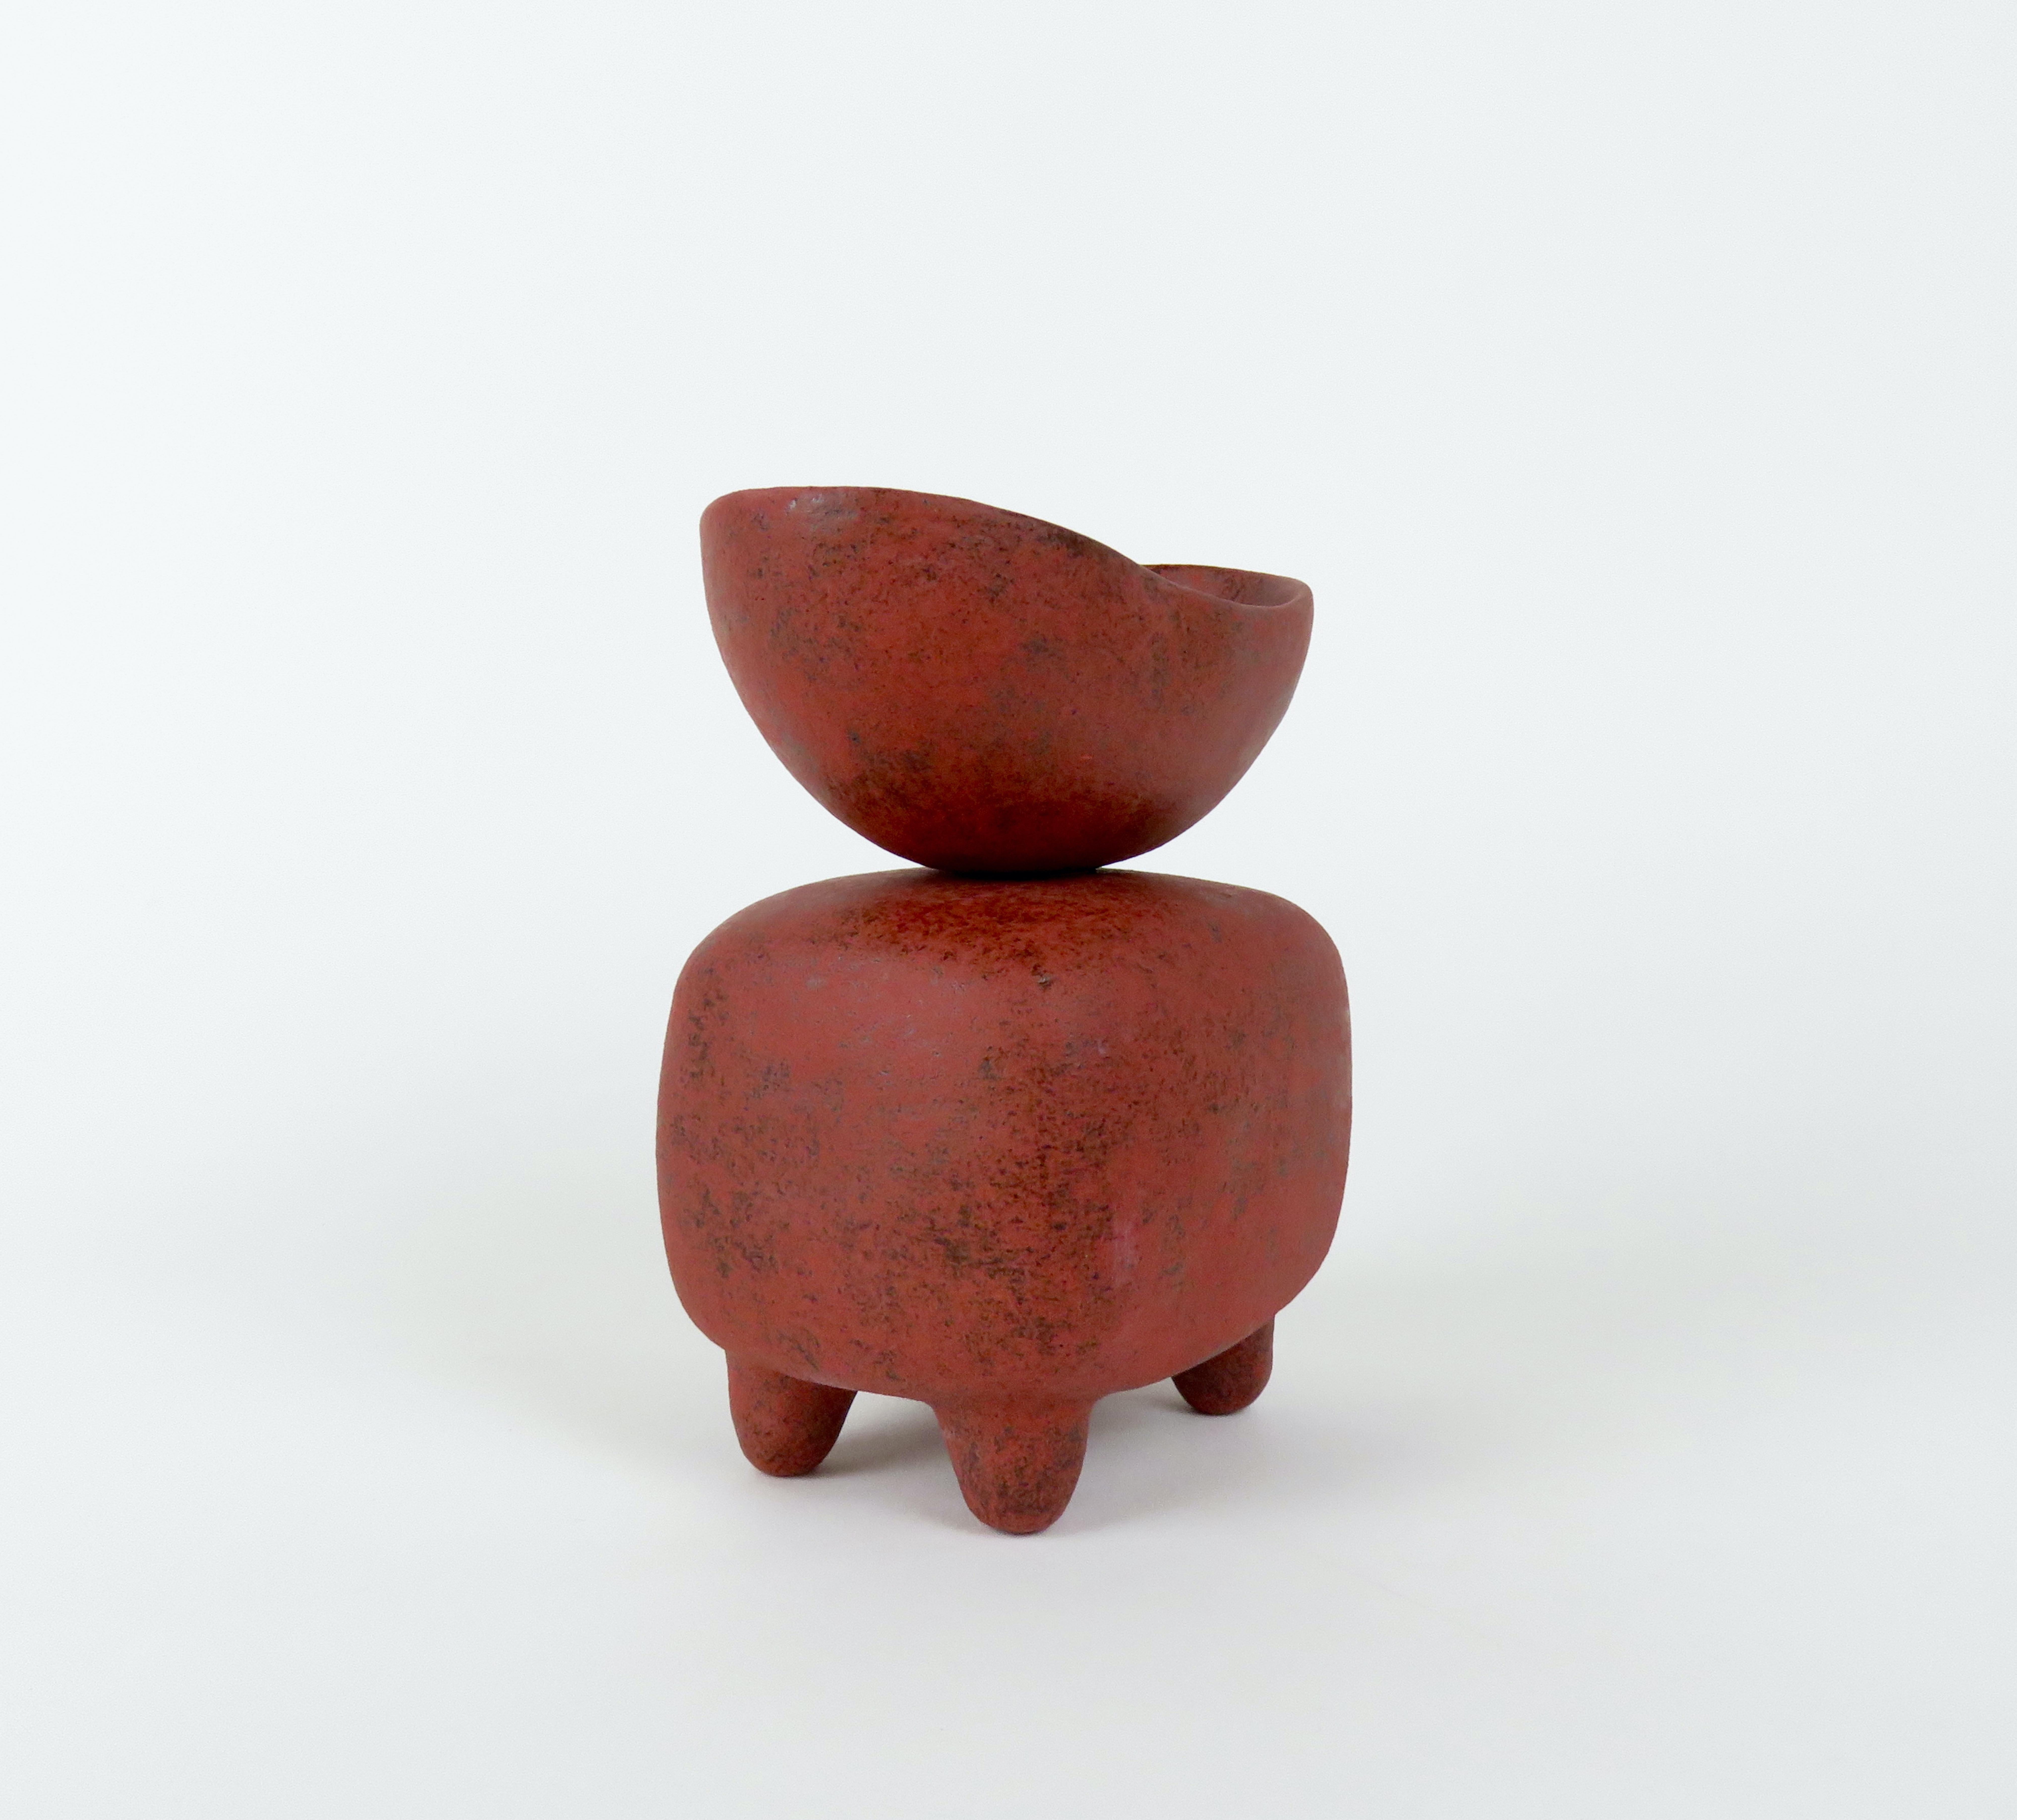 American Mottled Red Ceramic Sculpture, Wide Oval Cup on Rounded Cube, Hand Built 